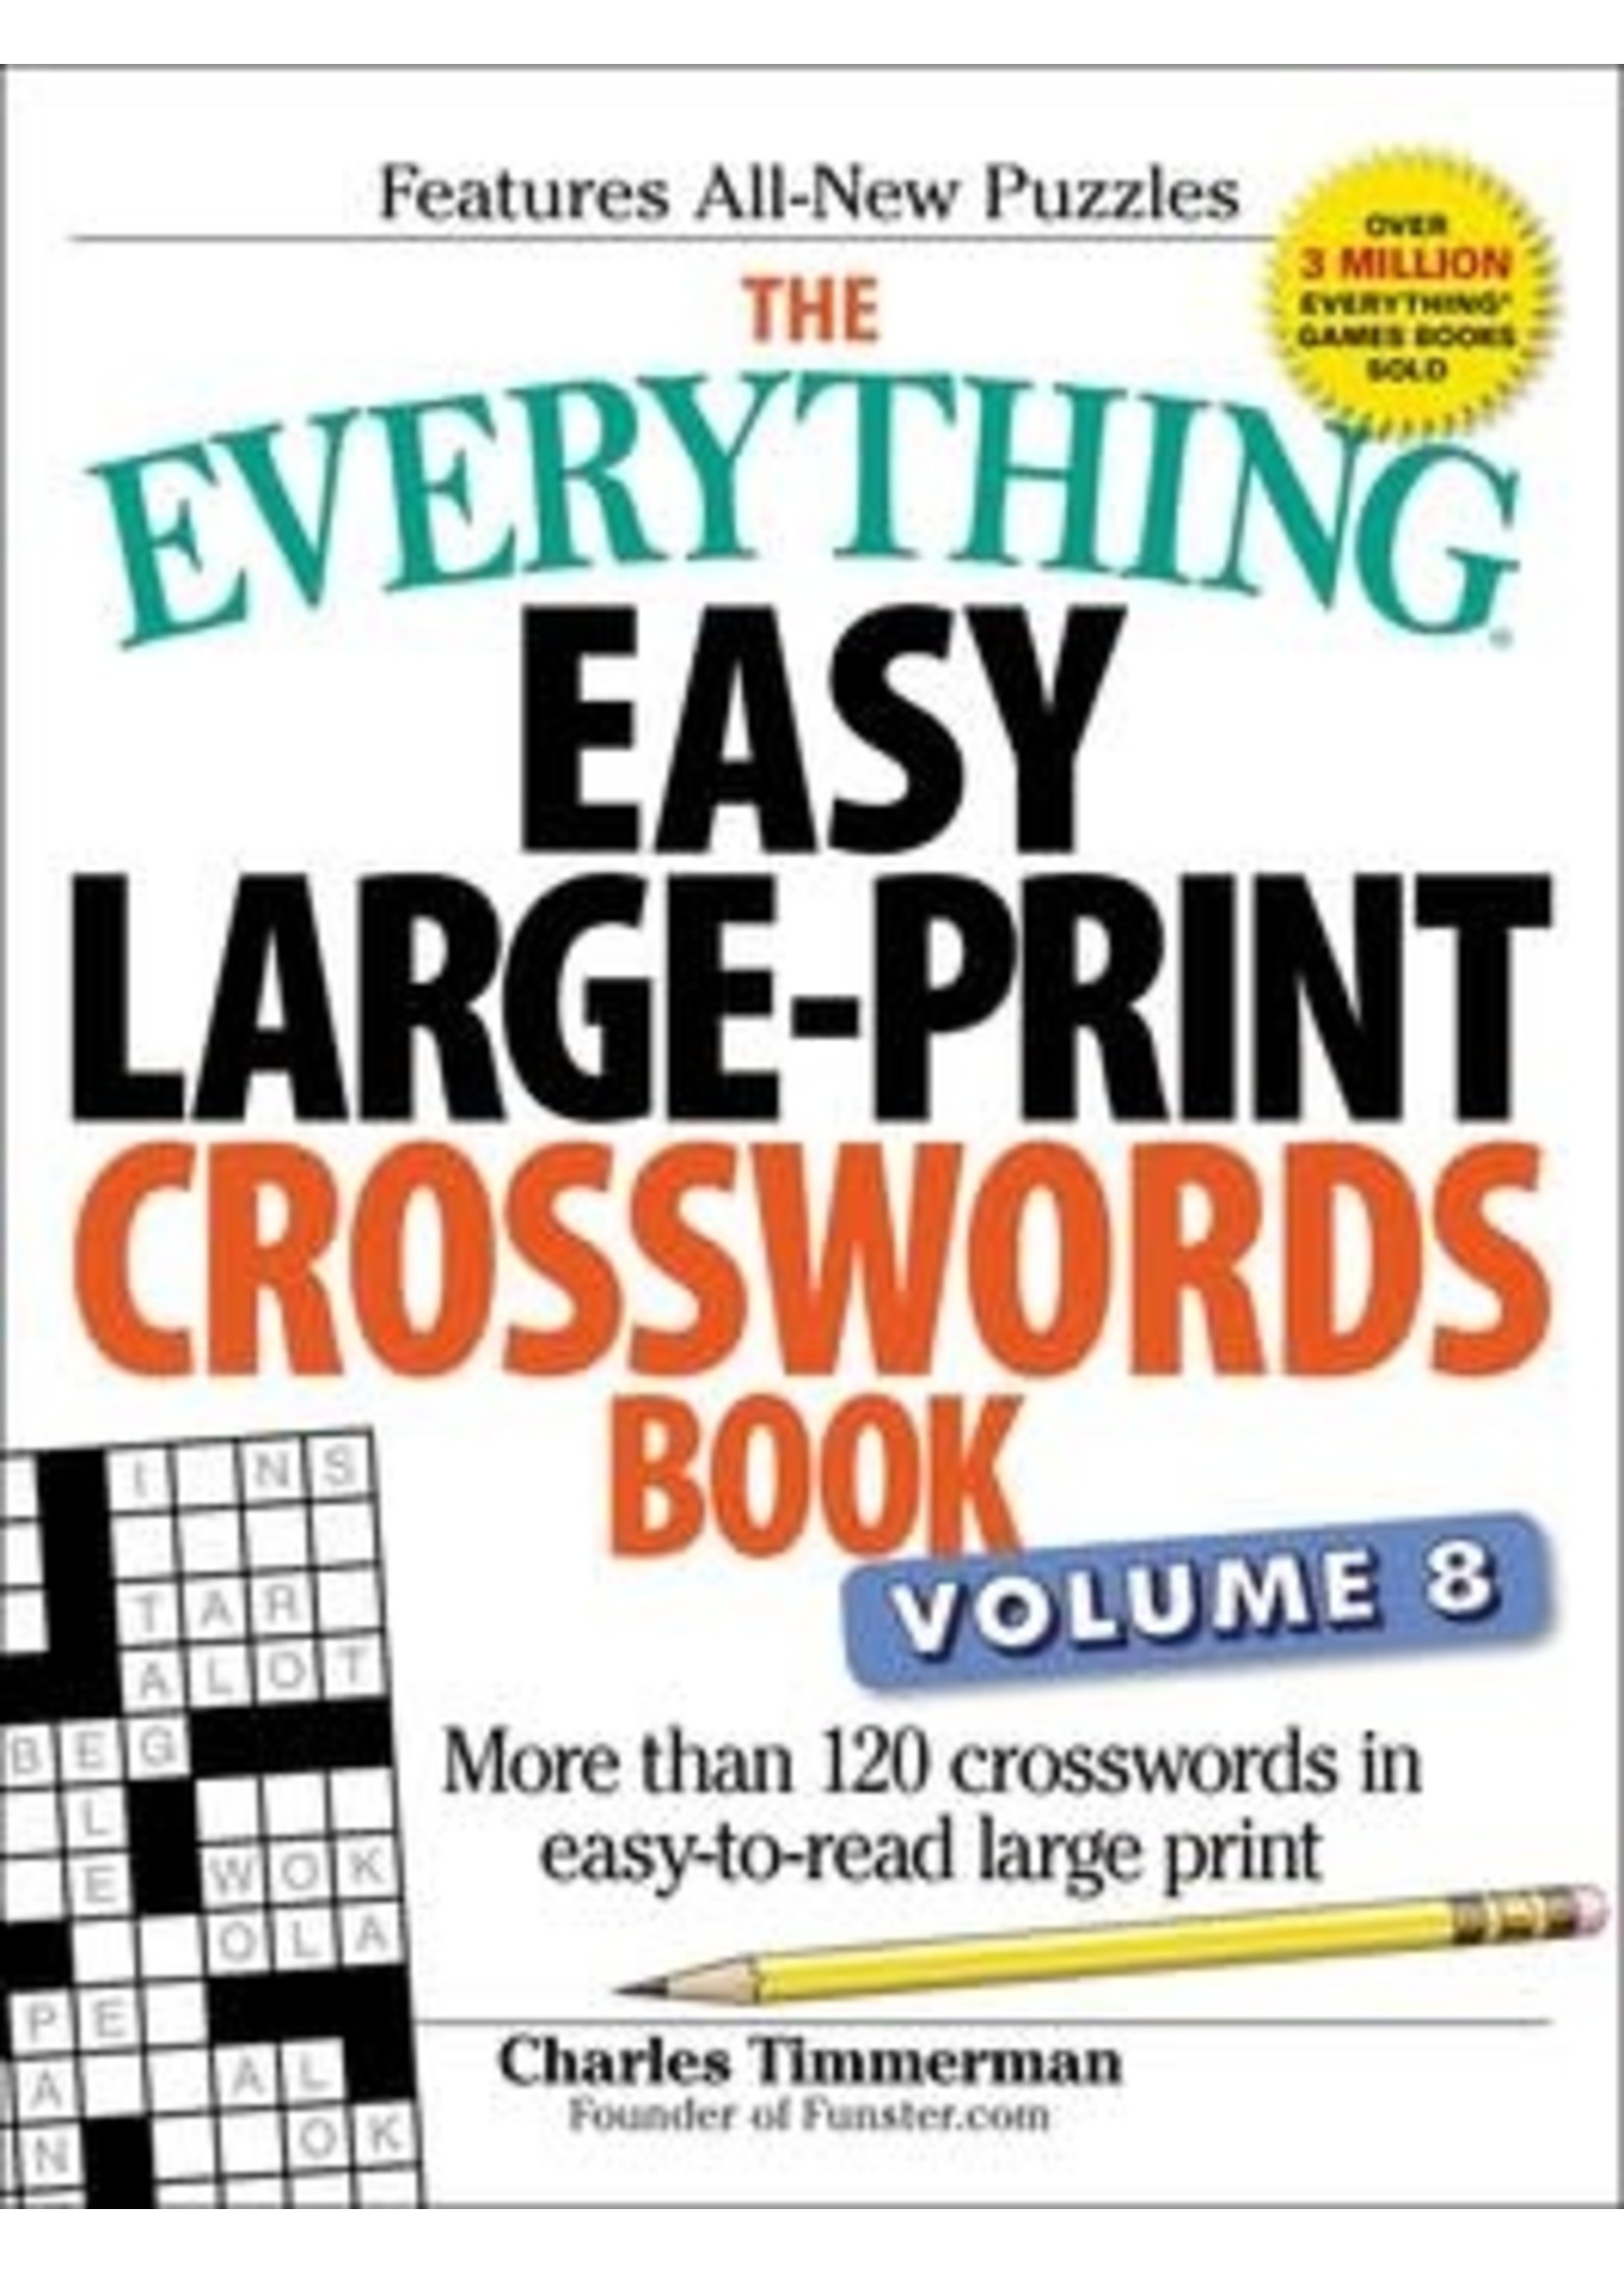 Simon & Schuster The Everything Easy Large Prints Crosswords Book Vol.8